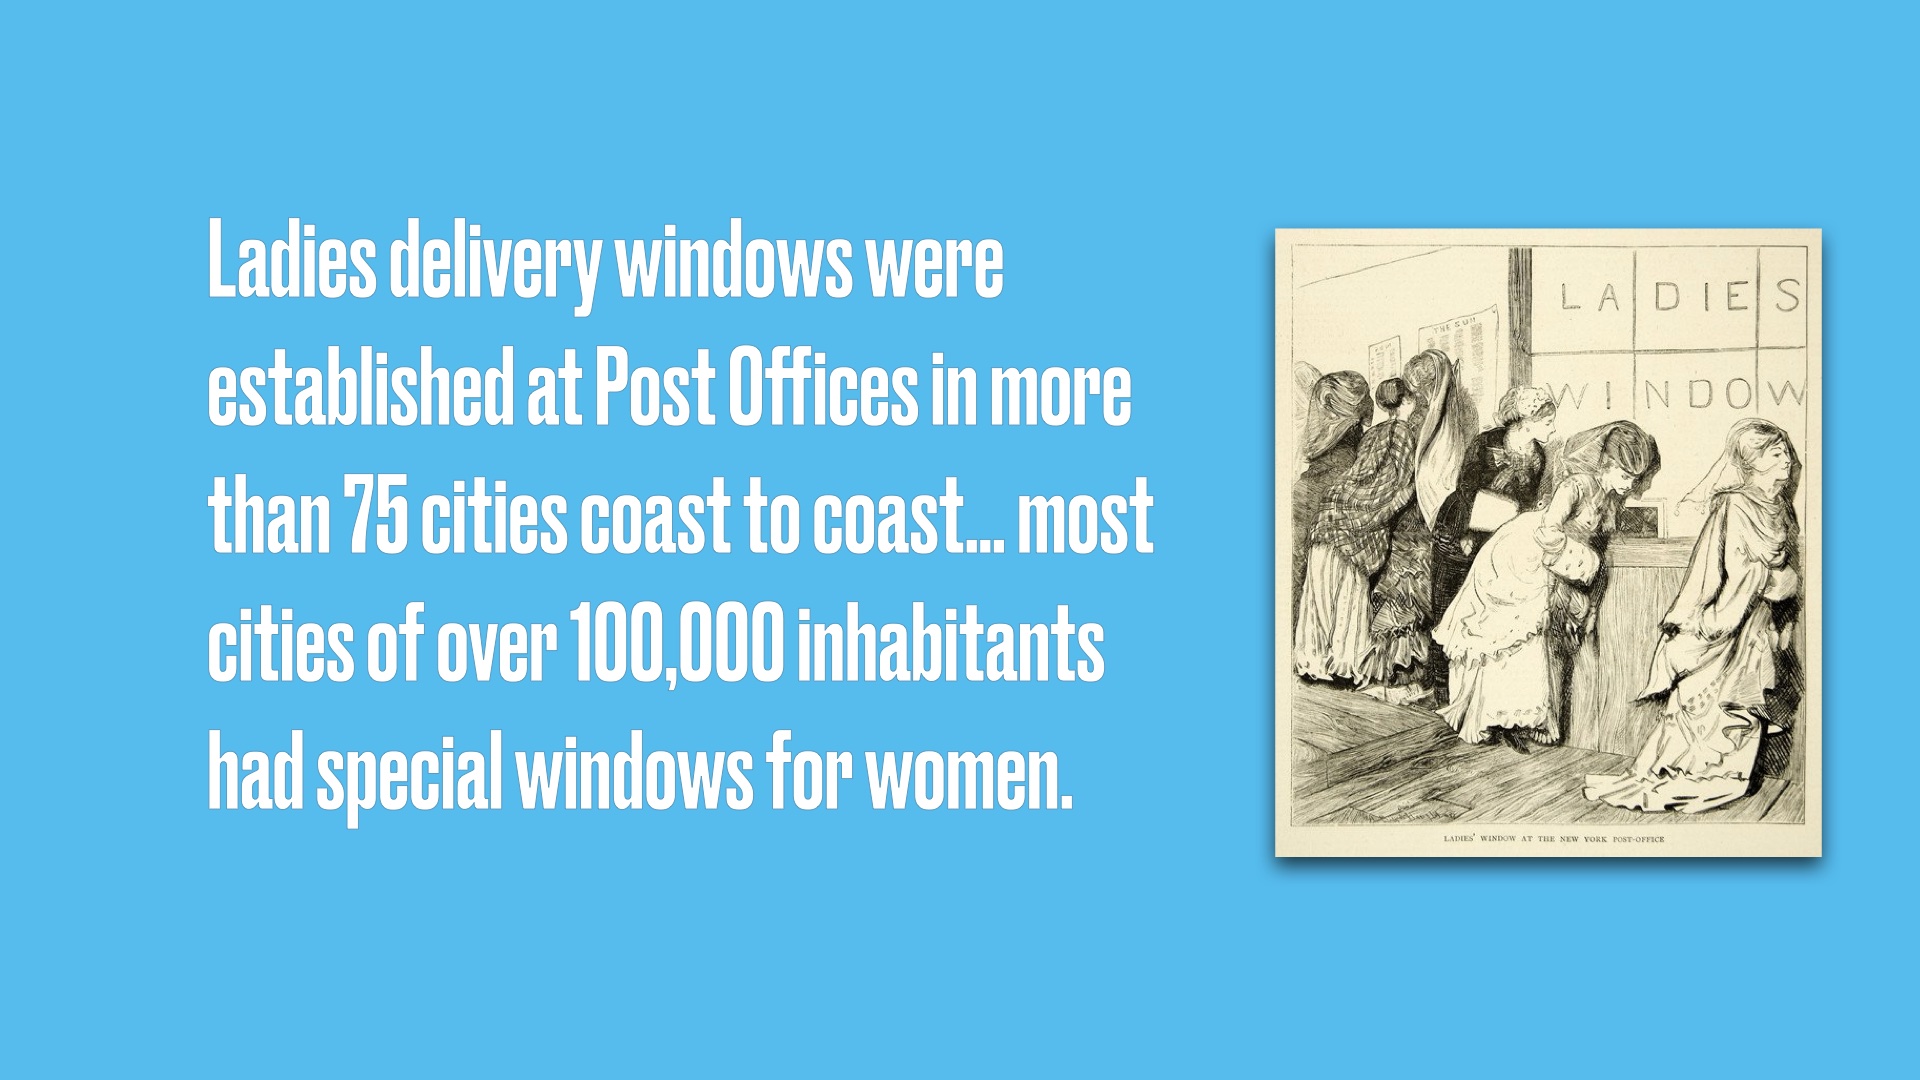 Image from an old book of women getting mail at the Ladies Delivery Window with the text 